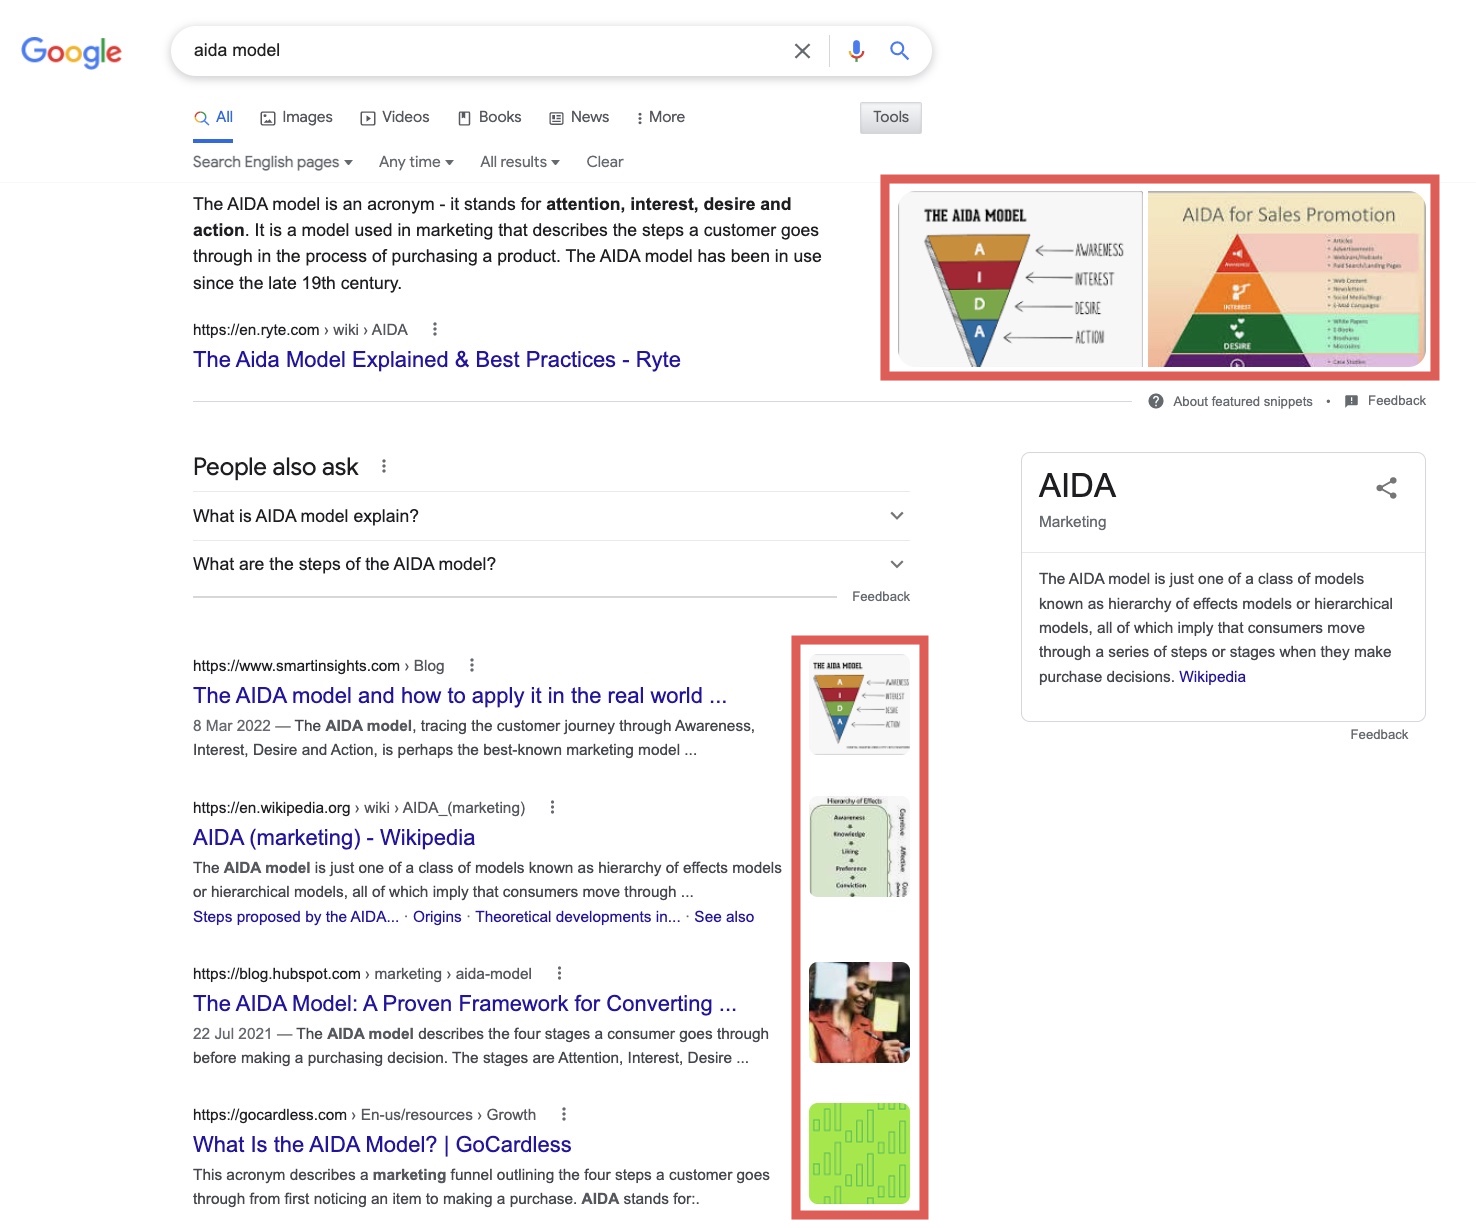 The image shows a screenshot of the SERP for the search query "aida model". Here you can clearly see that SEO-optimized images are placed prominently and can thus generate more attention. This is achieved on the one hand via the Featured Snippet and on the other hand via a preview of the images in the respective search results (both framed in red).